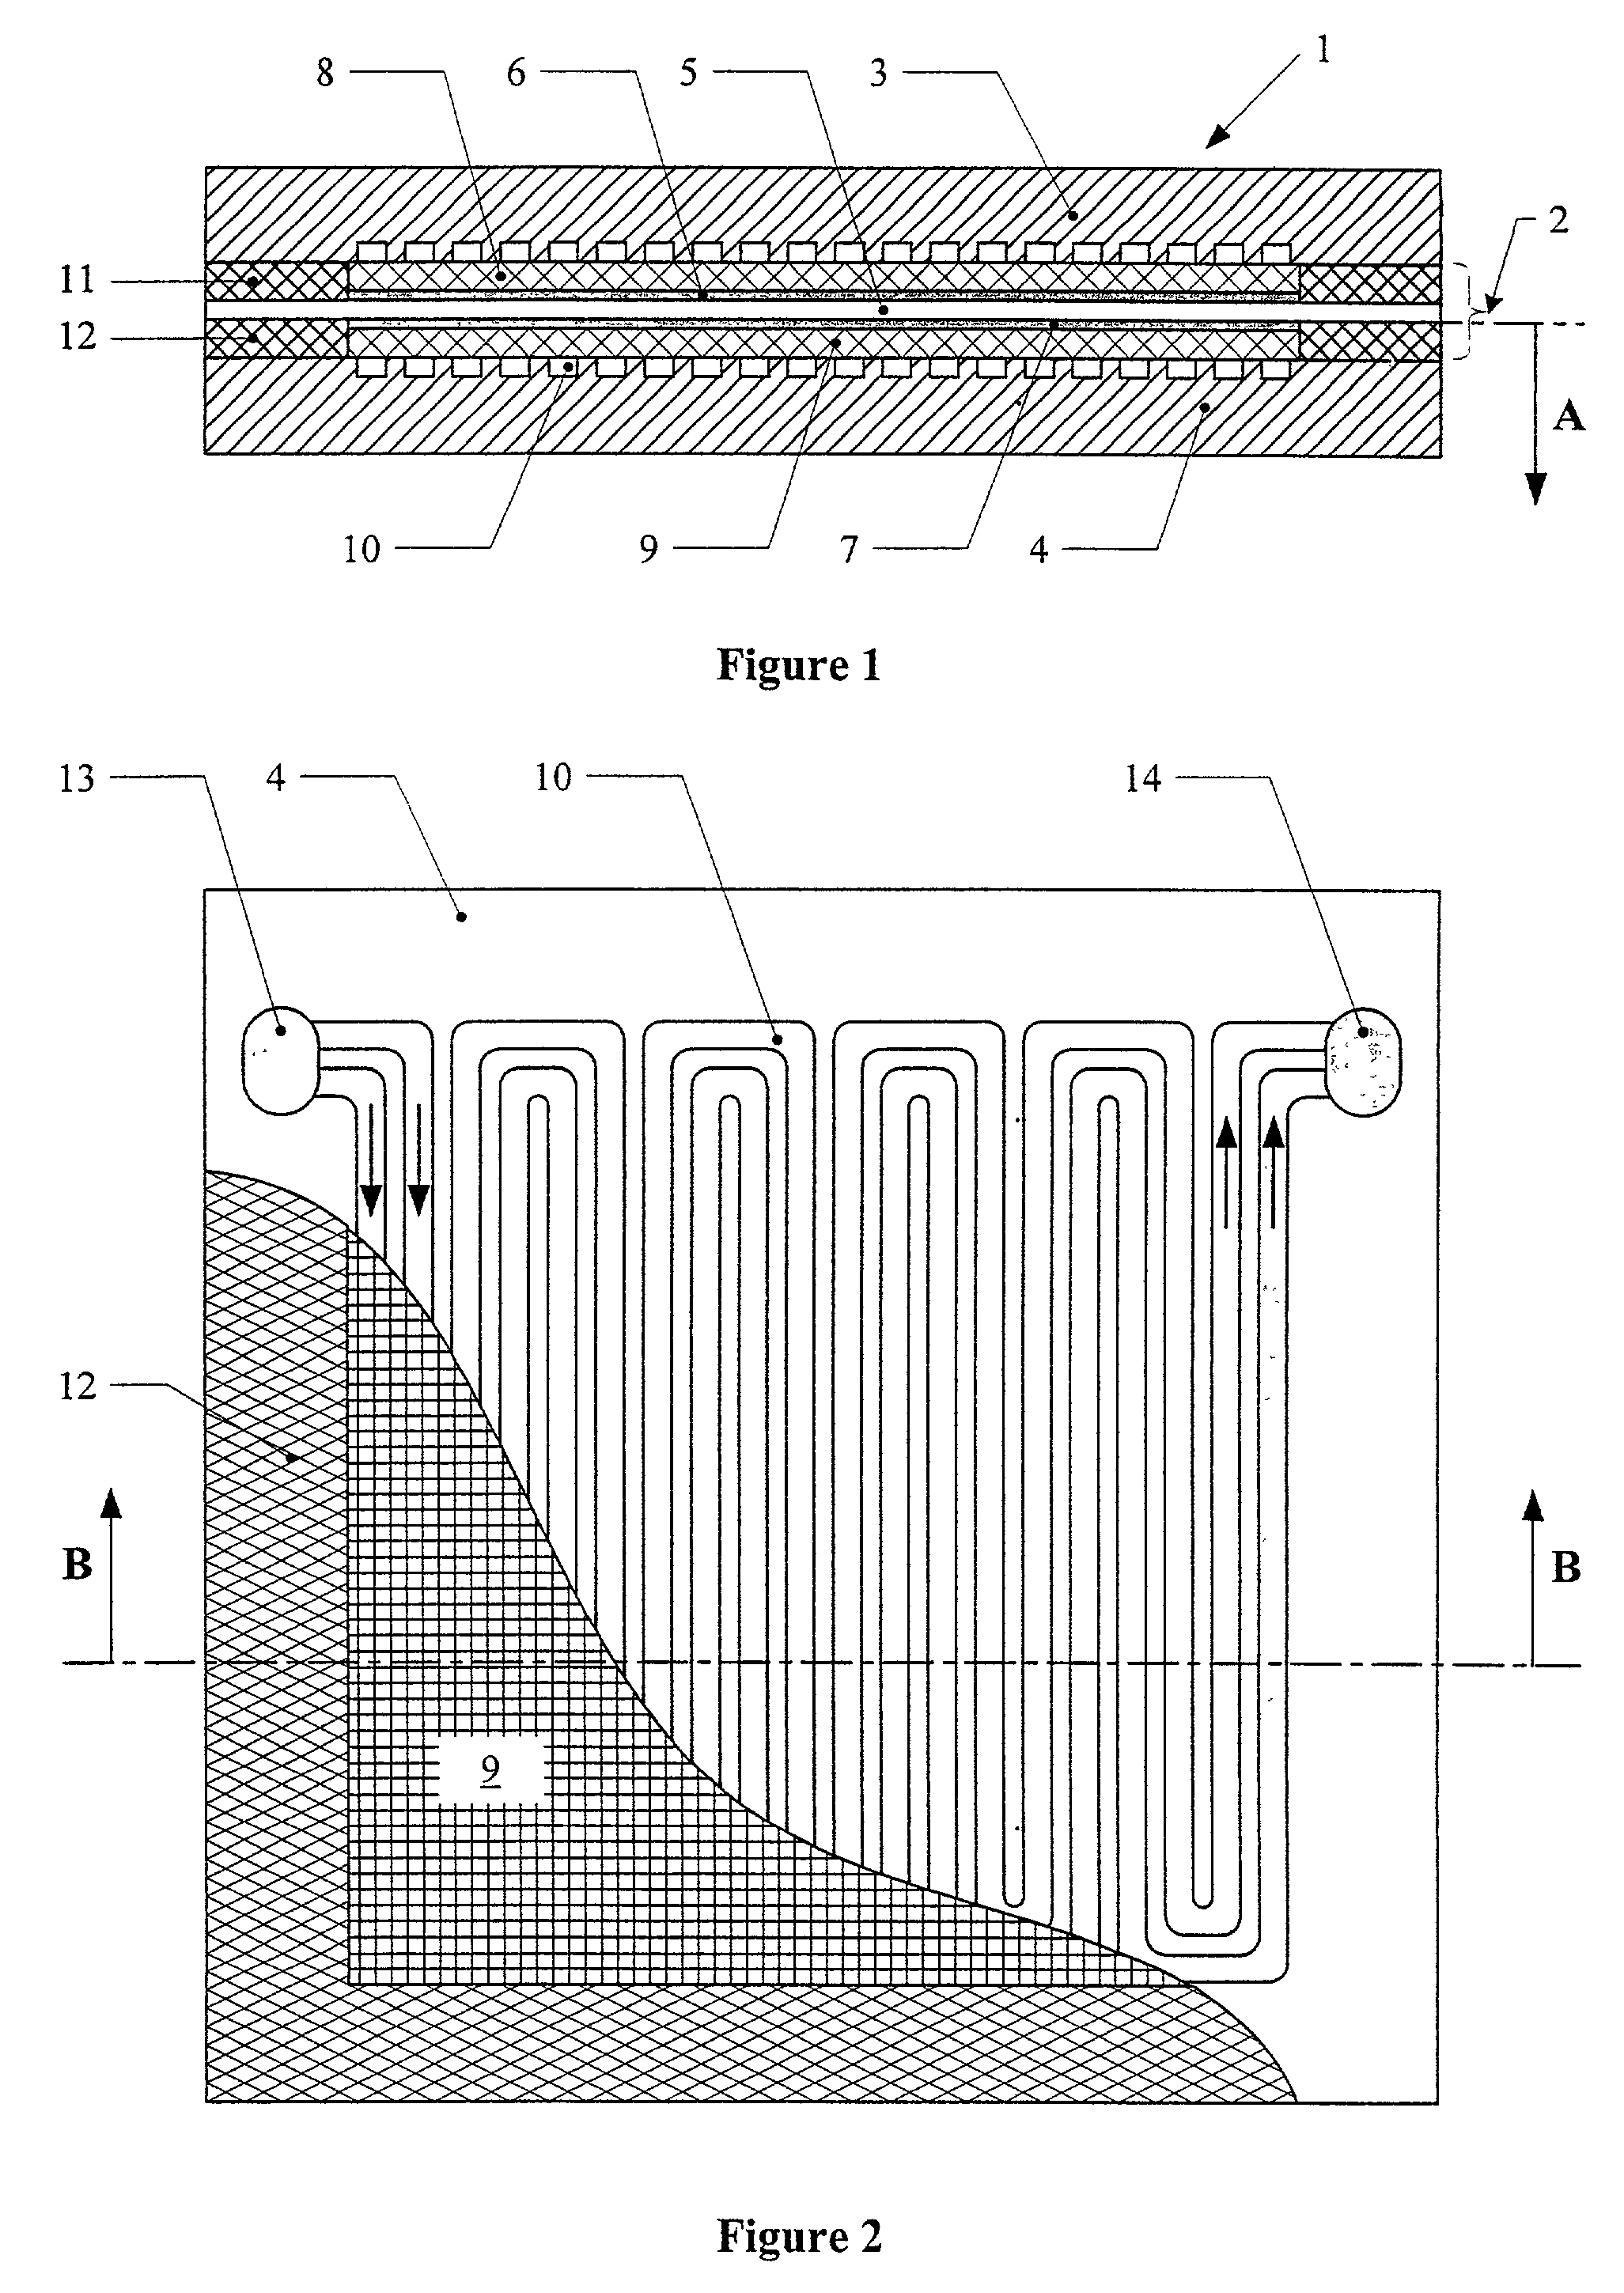 PEM fuel cell stack